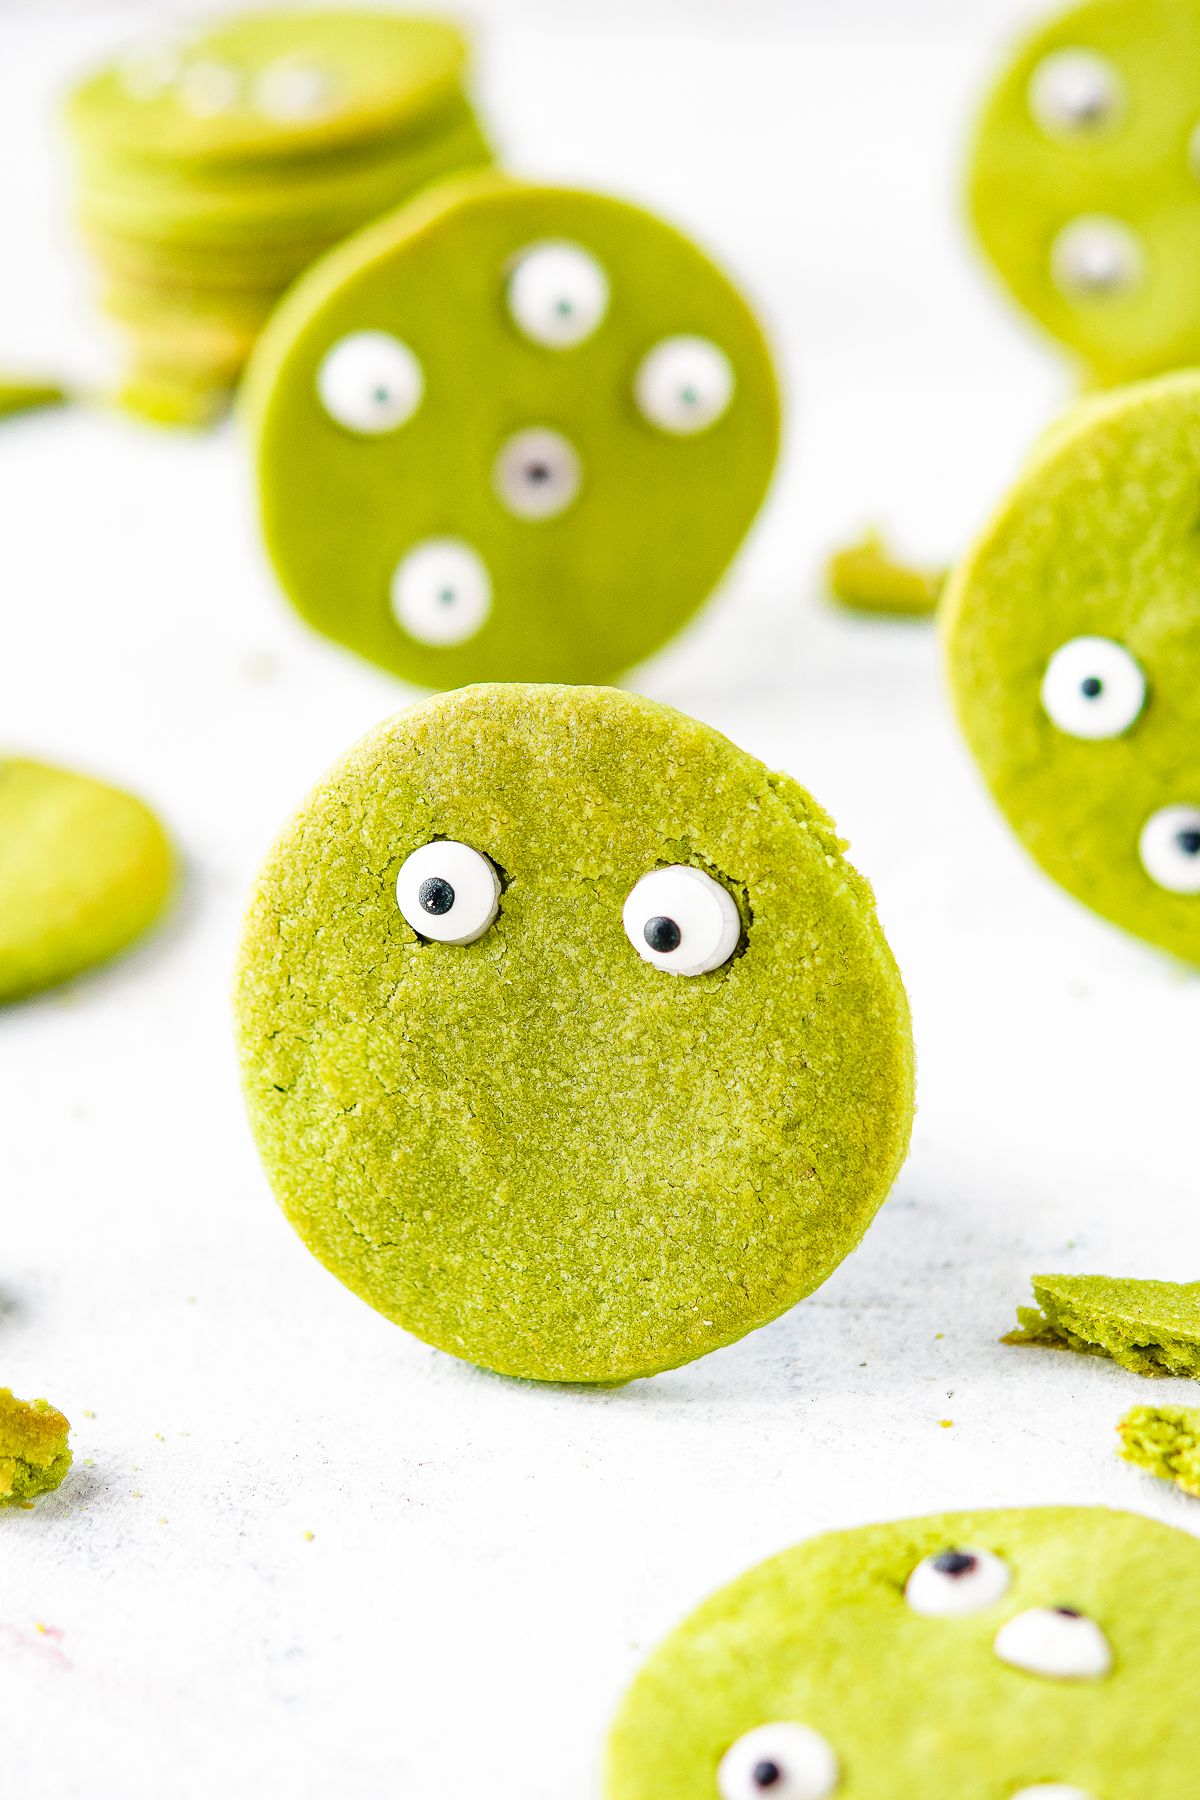 A round green Halloween Matcha cookie against a white background. Edible eyes decorate the cookie to look like a green monster face.